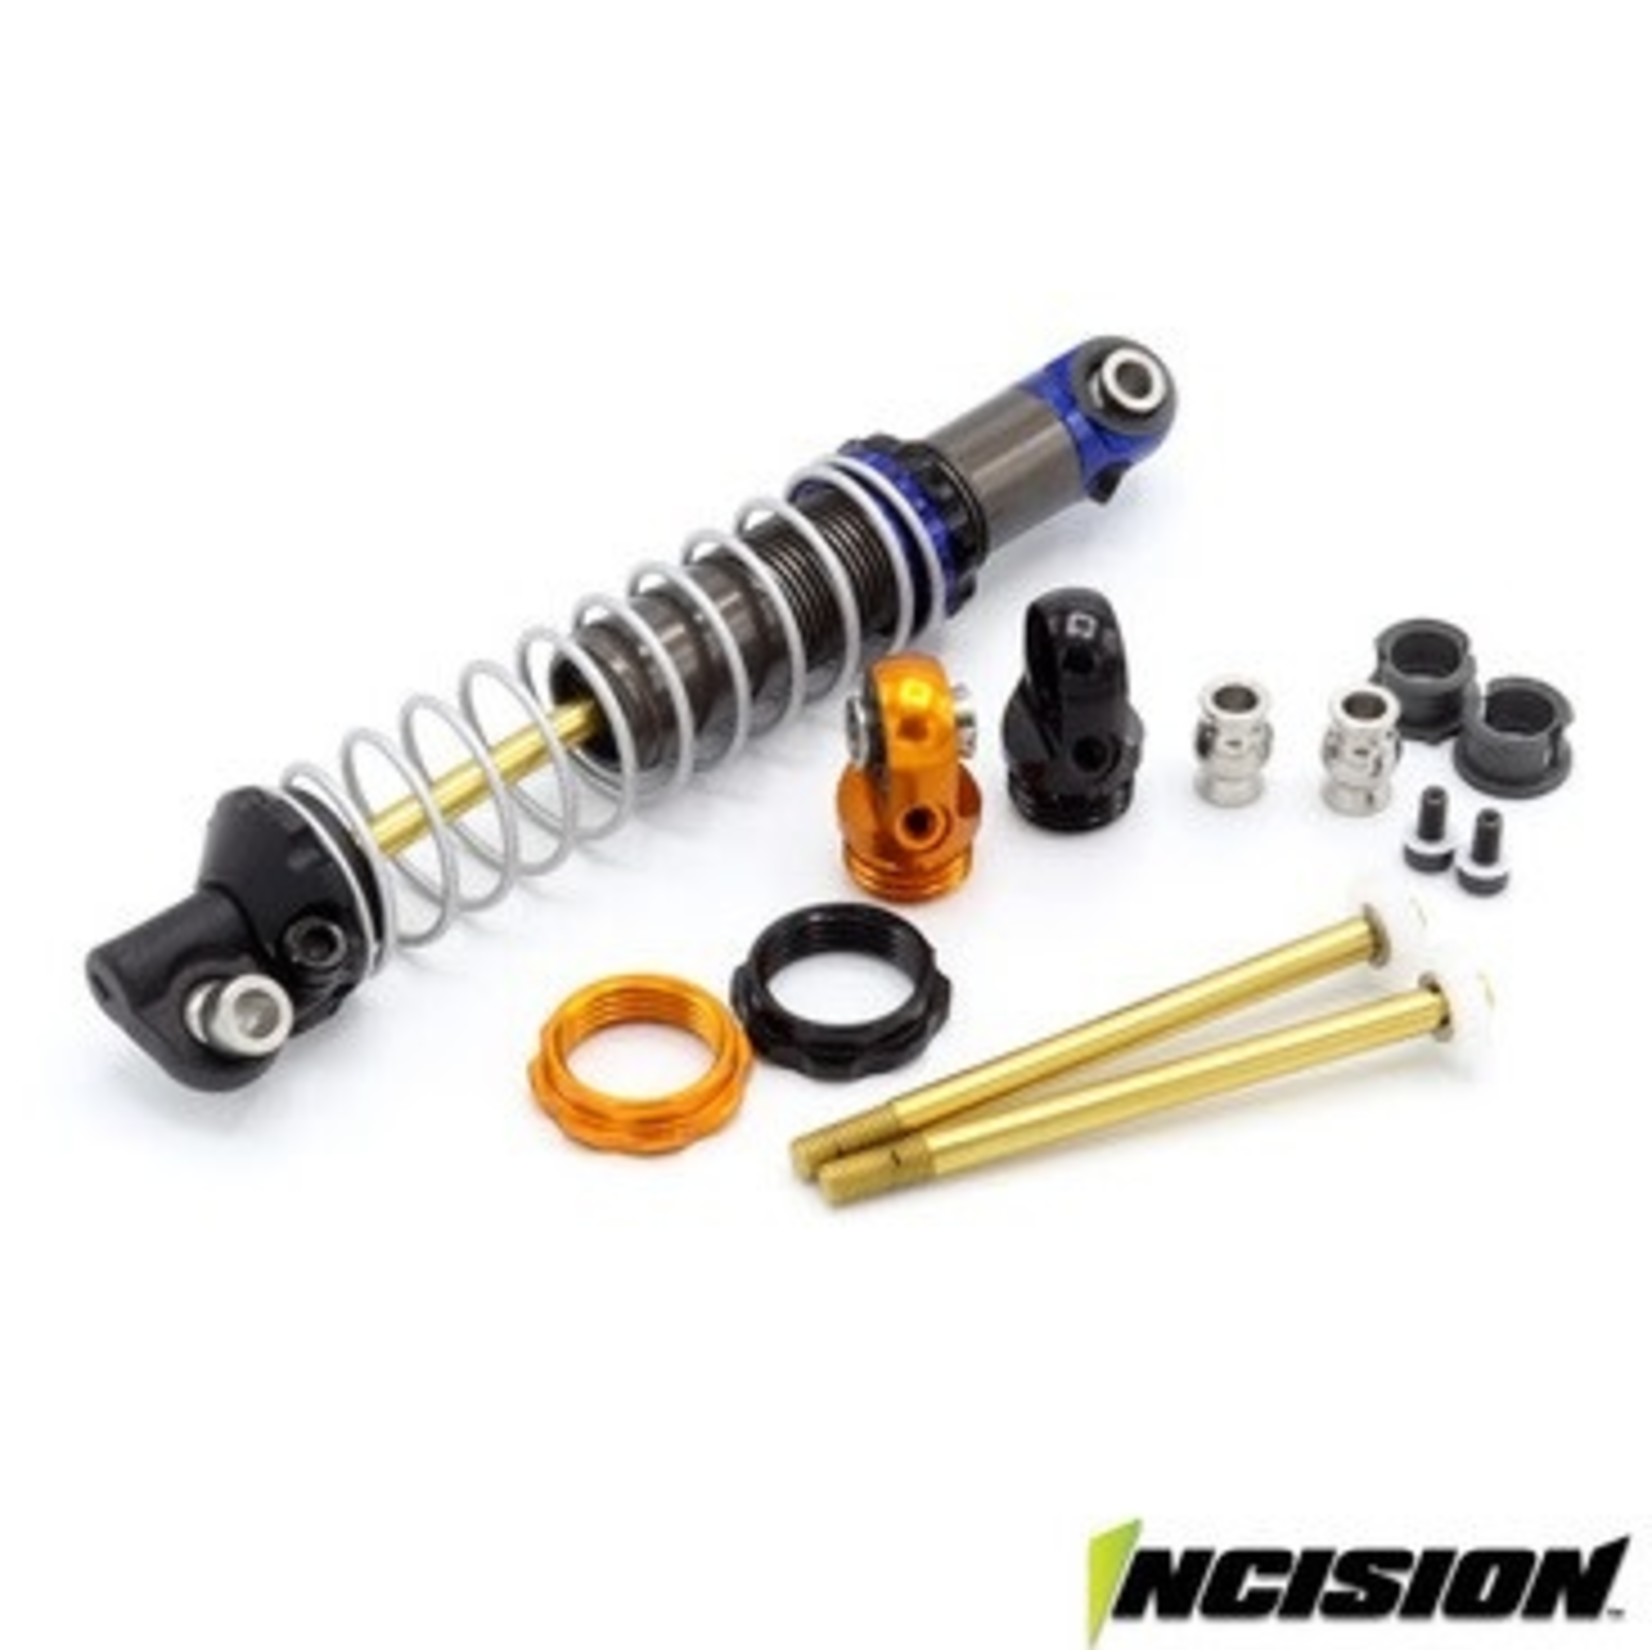 Incision Incision S8E 80mm Shock Body Hard Anodized #IRC00520